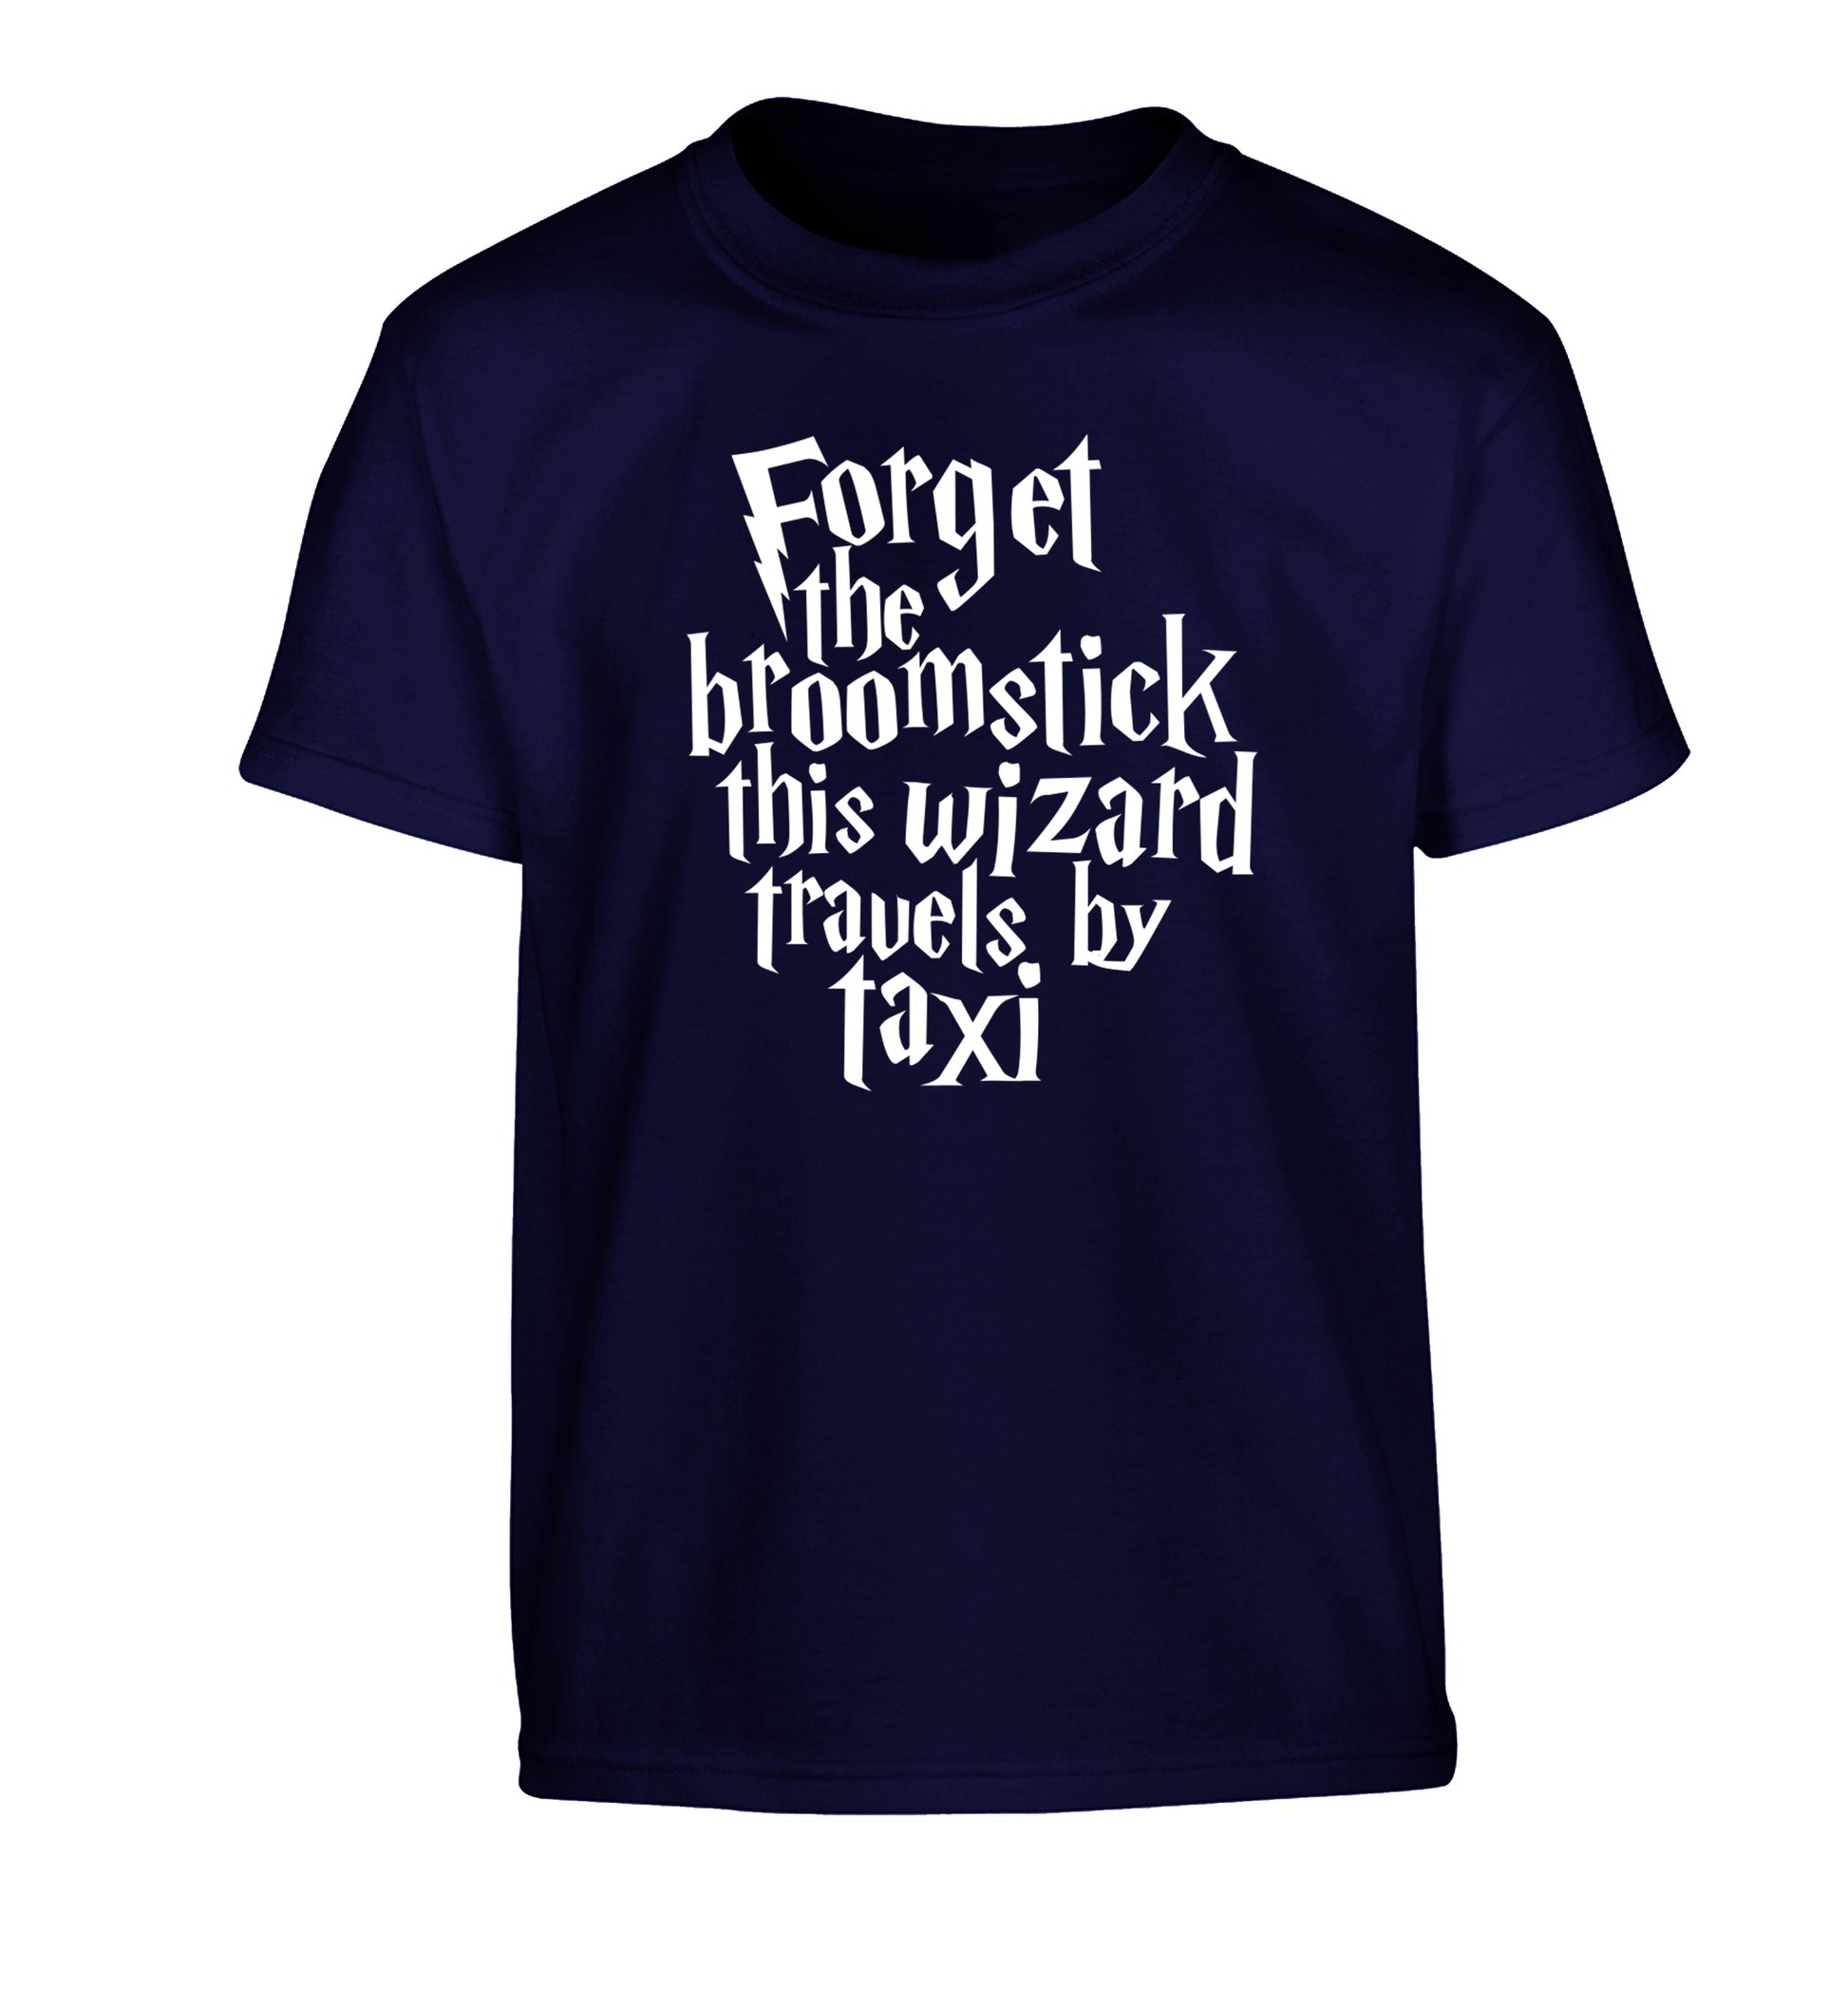 Forget the broomstick this wizard travels by taxi Children's navy Tshirt 12-14 Years